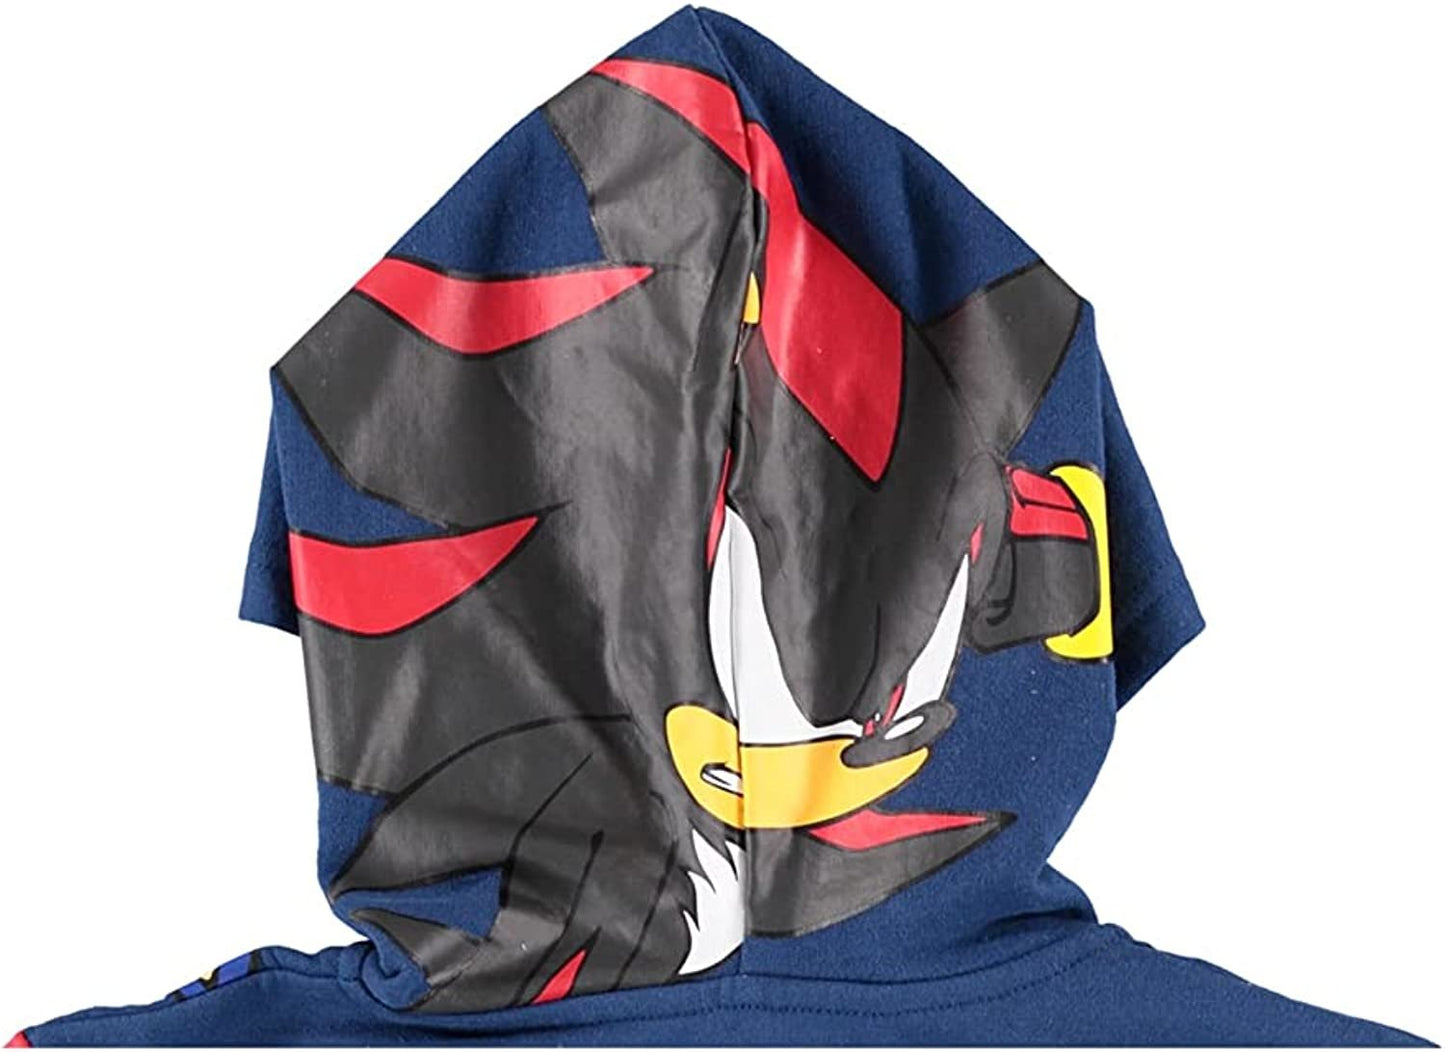 Boys Sonic The Hedgehog Costume Zip Up Fleece Hoodie-Featuring Sonic, Tails and Knuckles -Boys 4-20